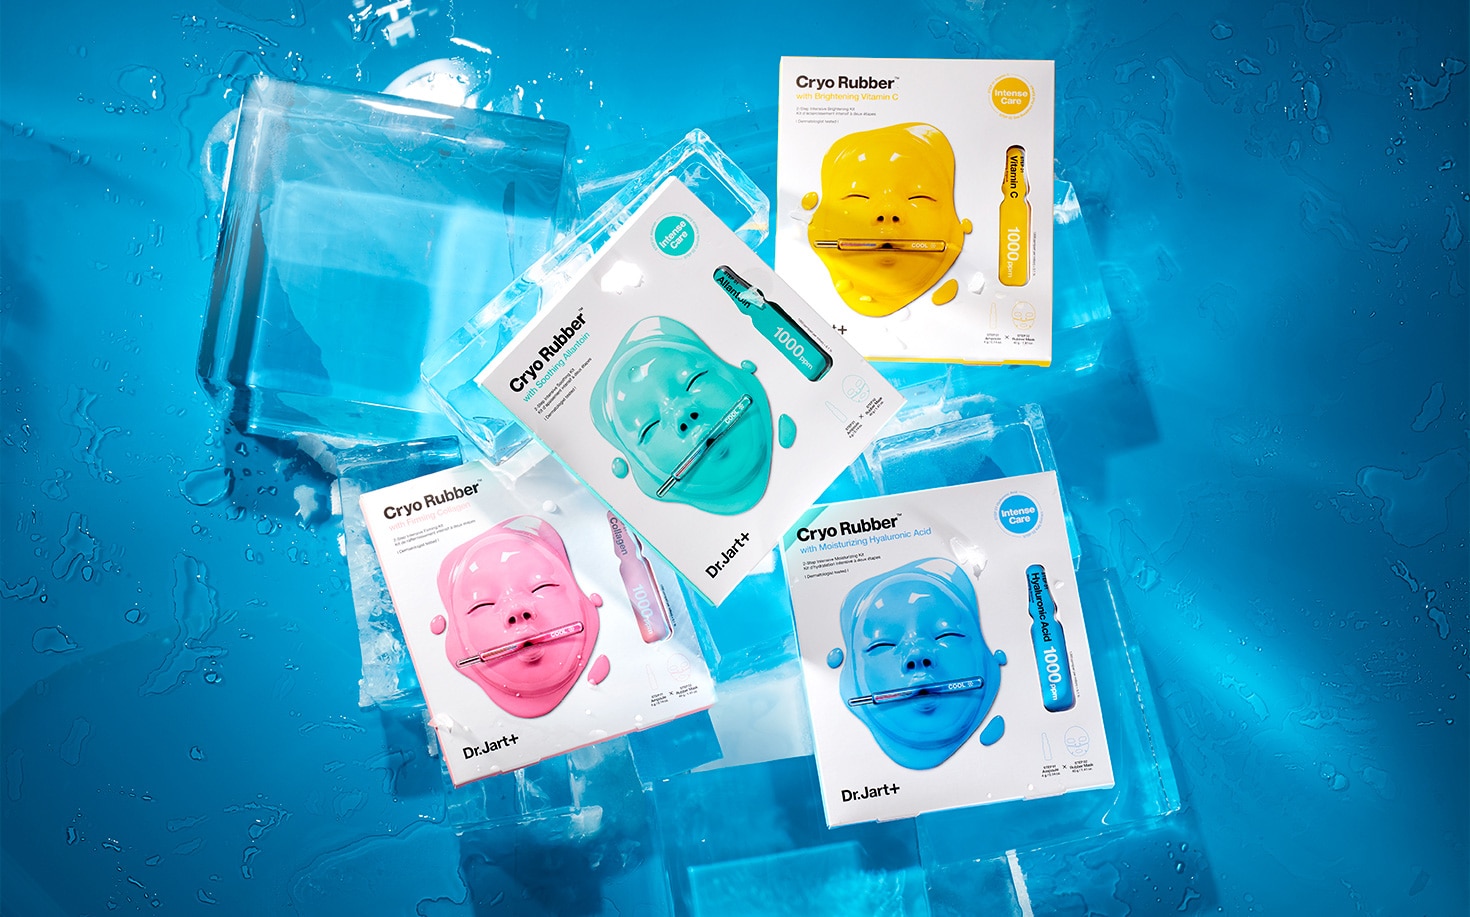 Cryo Rubber Mask packages are stacked on ice cubes